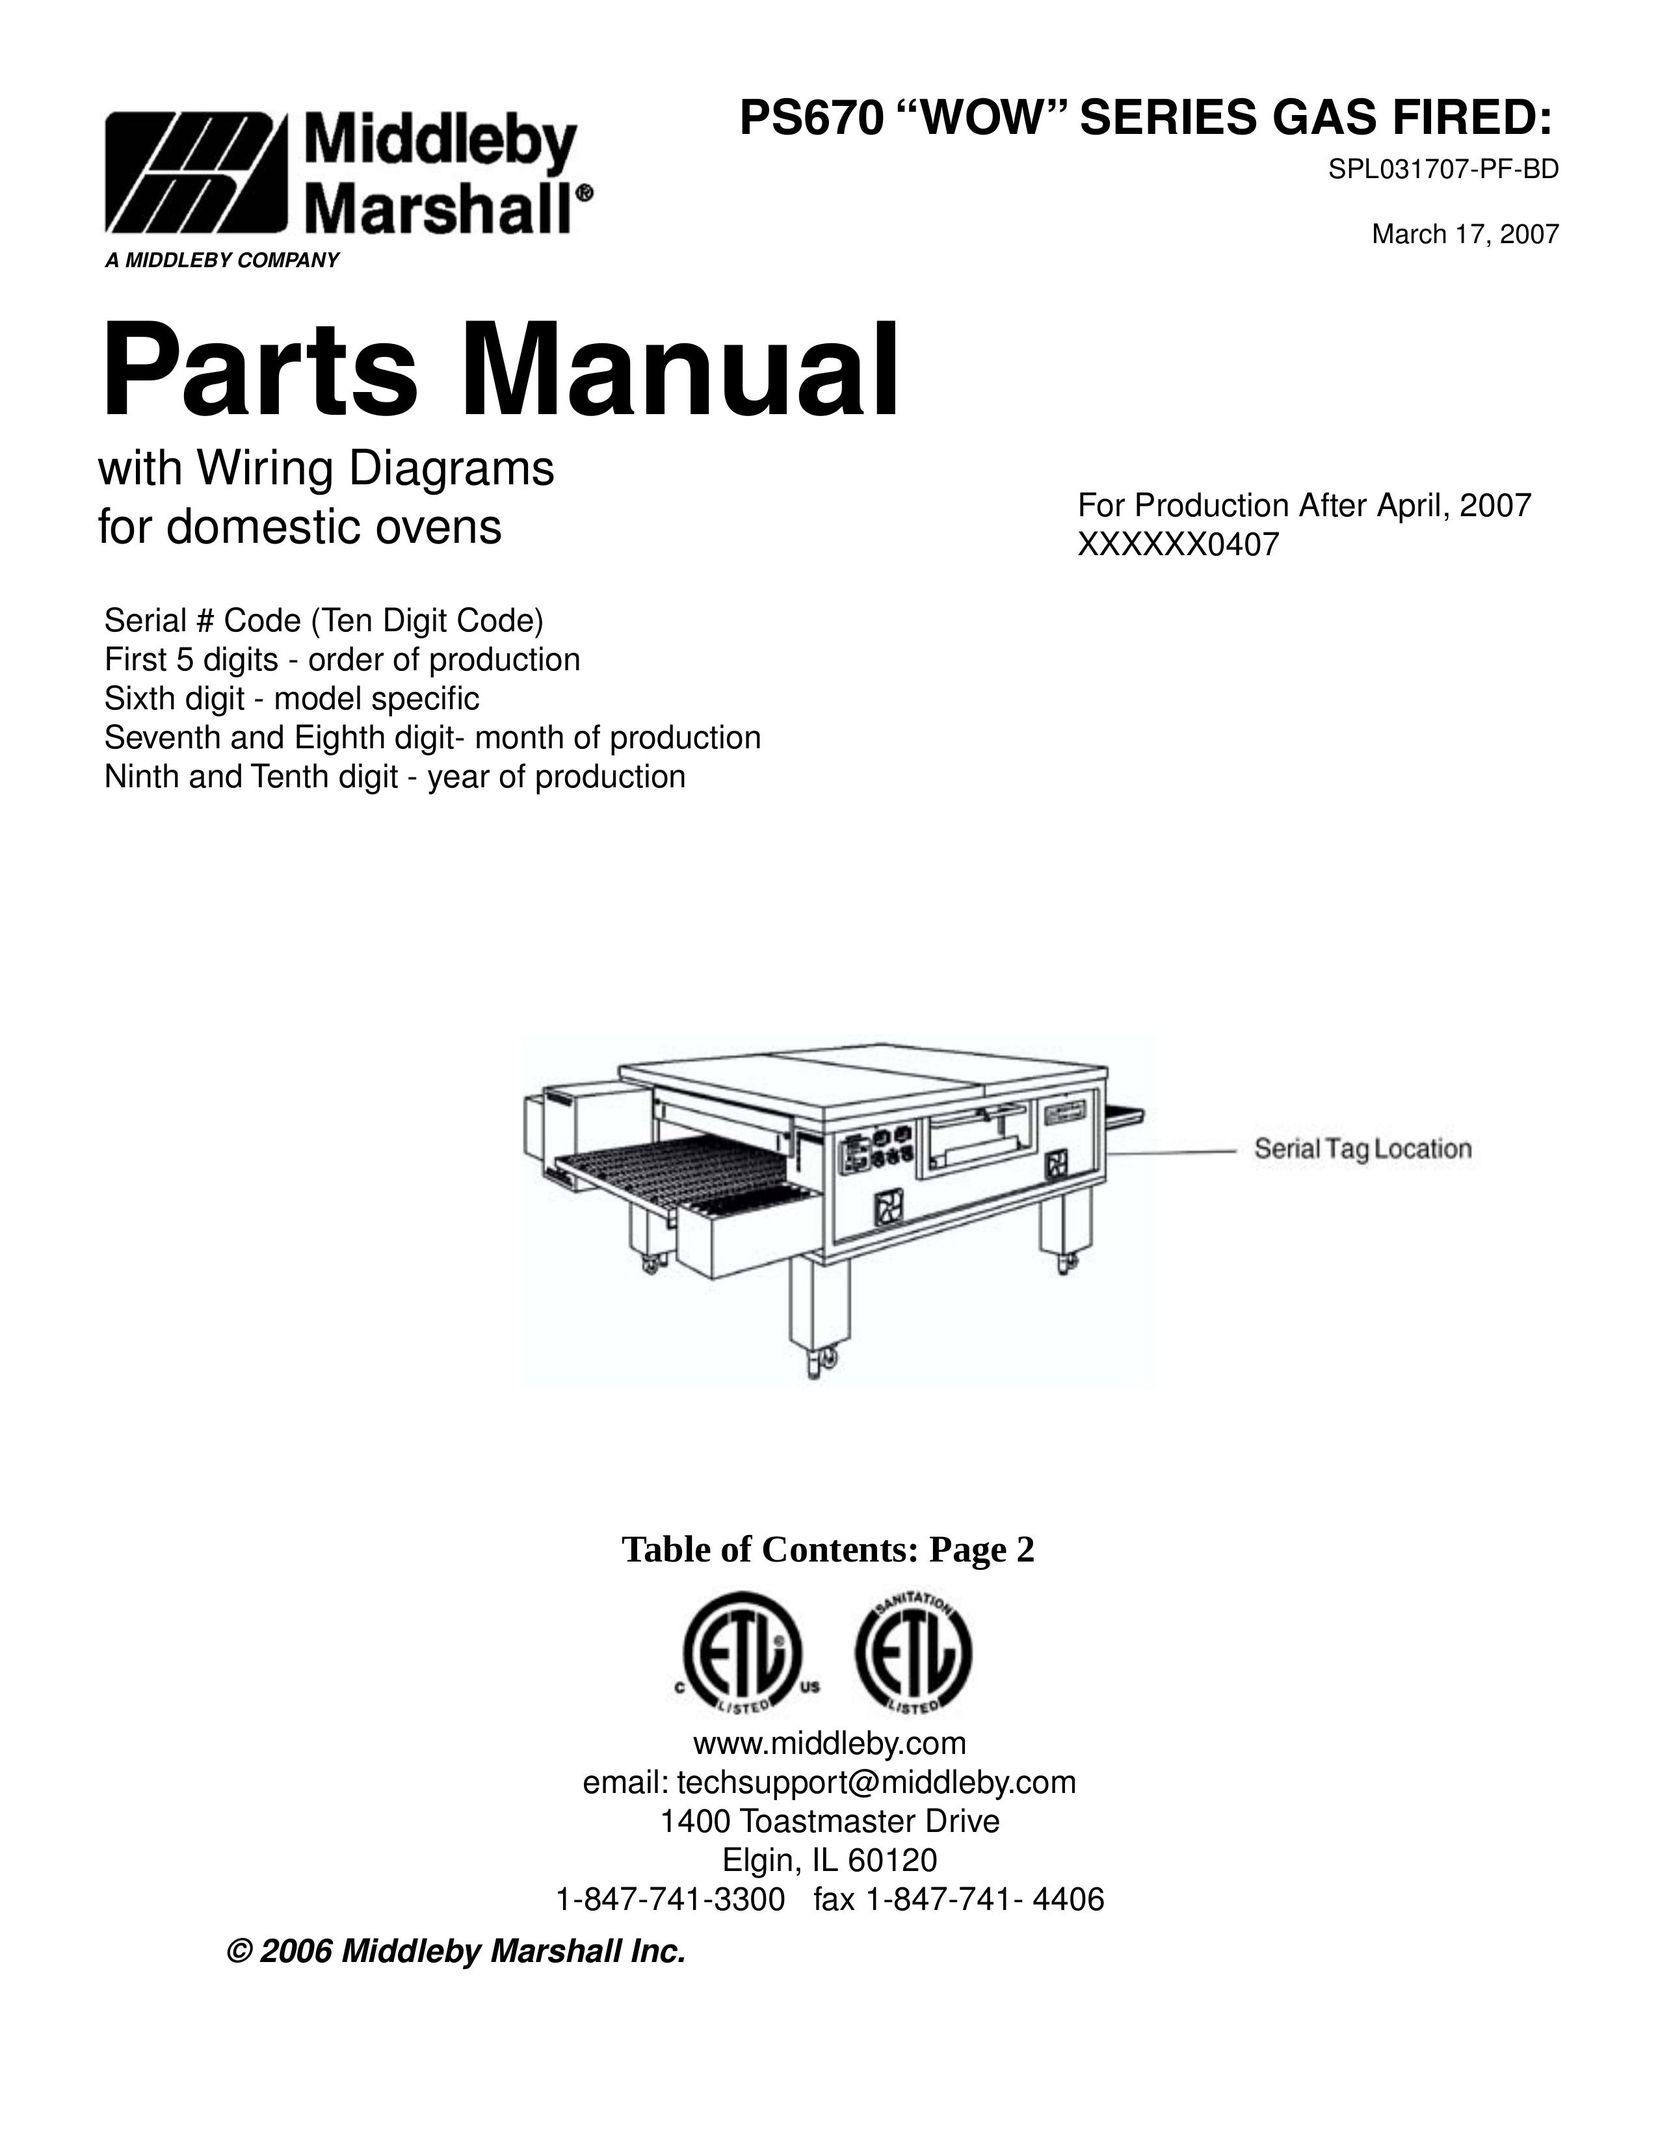 Middleby Marshall PS670 Appliance Trim Kit User Manual